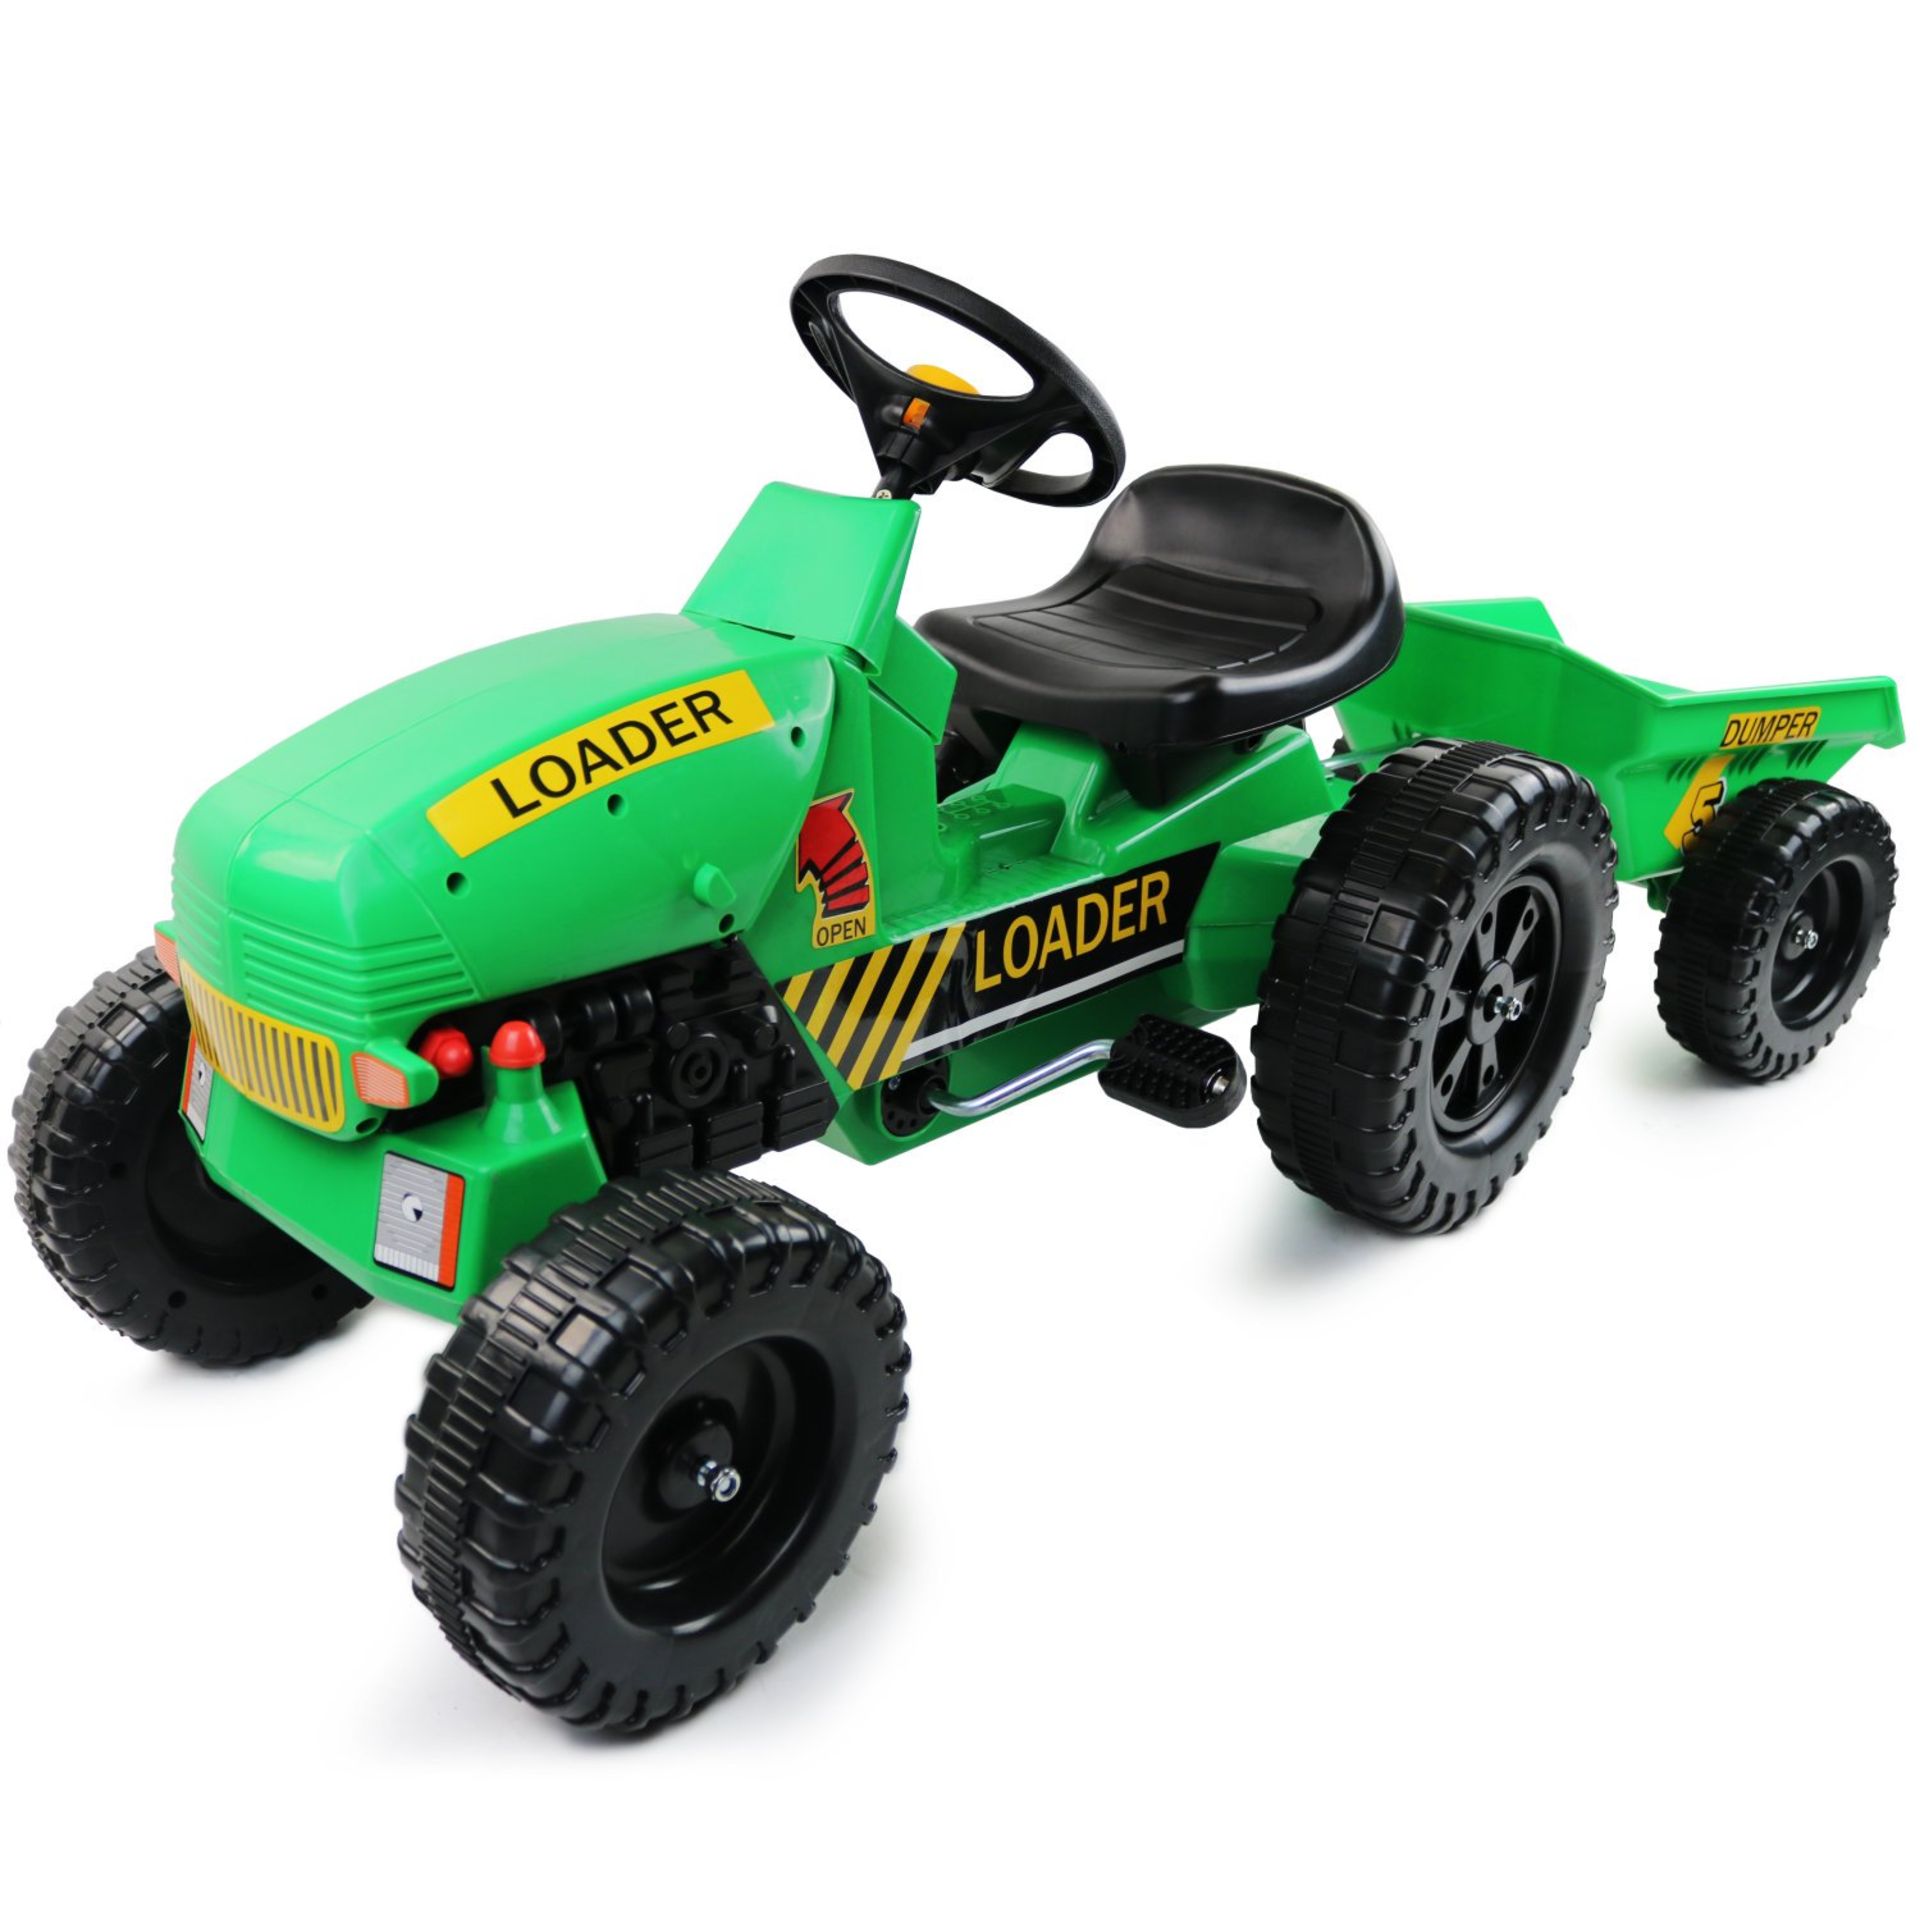 (F22) Childrens Pedal Ride on Green Super Tractor With Toy Trailer CE & EN71 Certified - Ages ...